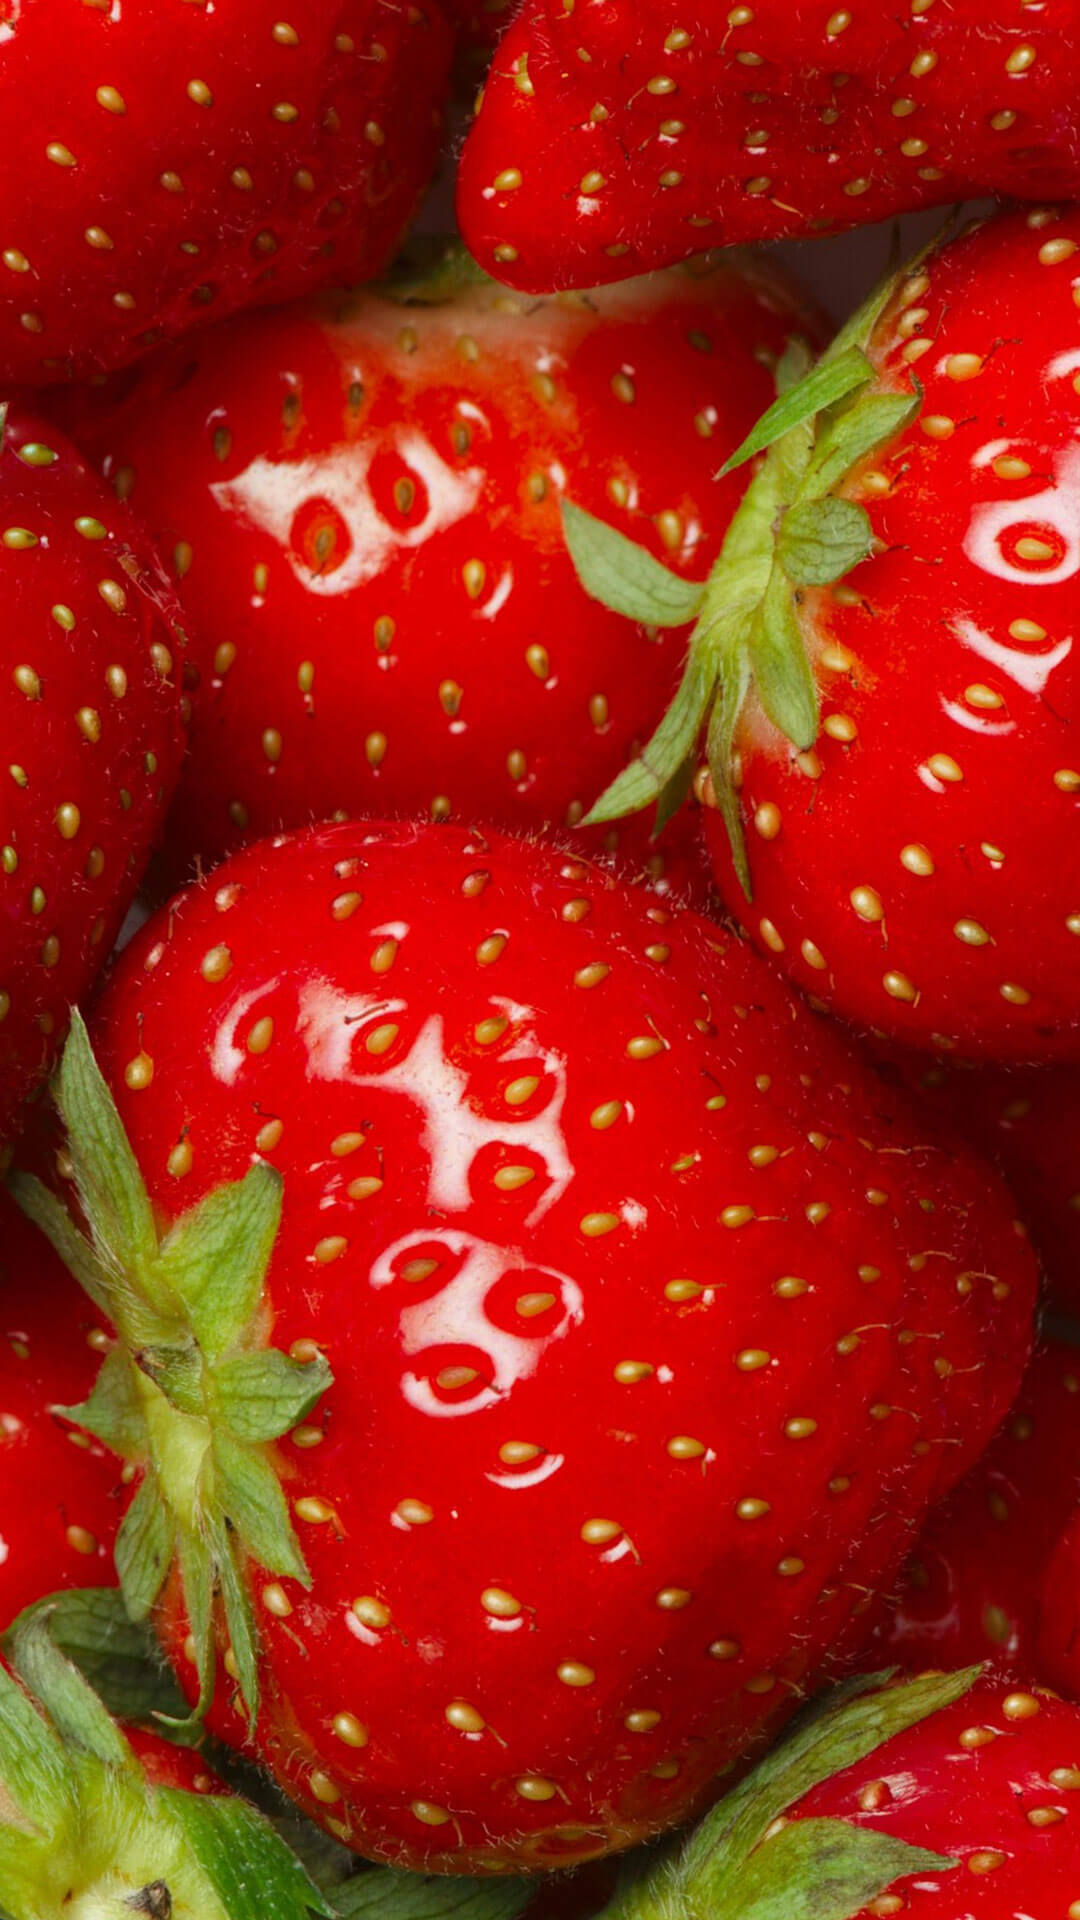 Strawberry Wallpaper For iPhone 6 Plus - HD Wallpaper iPhone